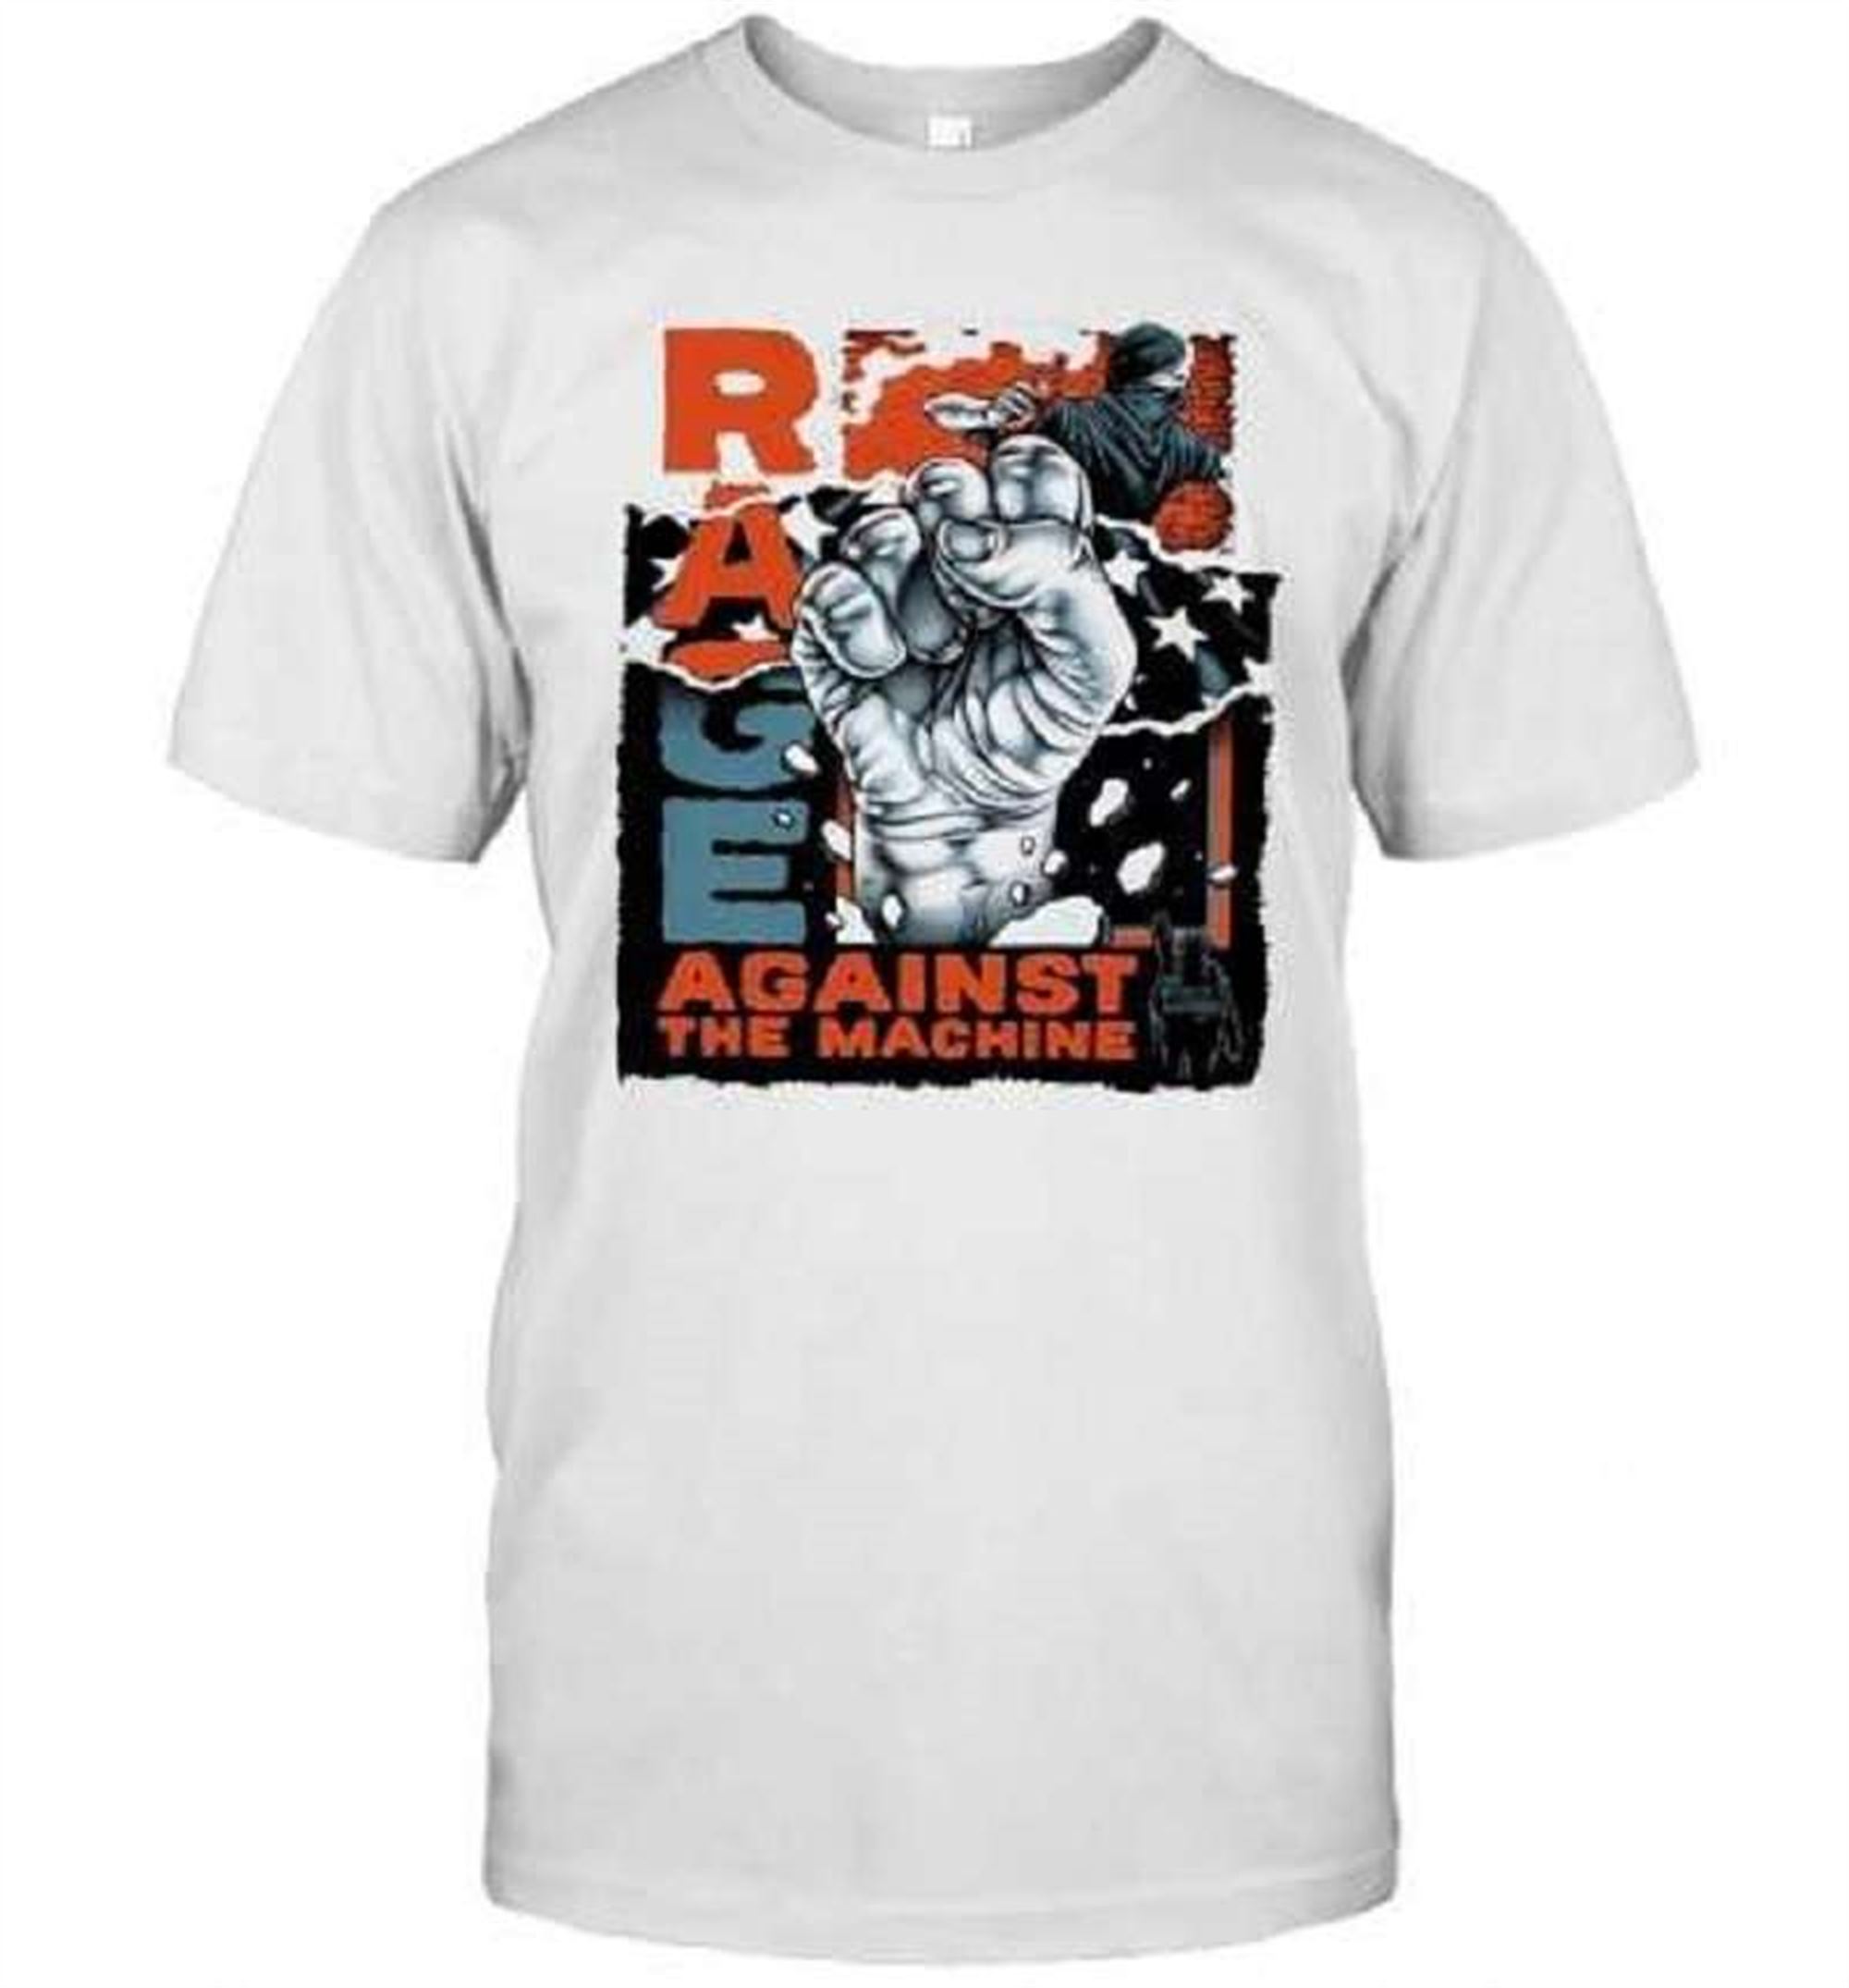 Rage Against The Machine Black Lives Matter T-shirt Plus Size Up To 5x